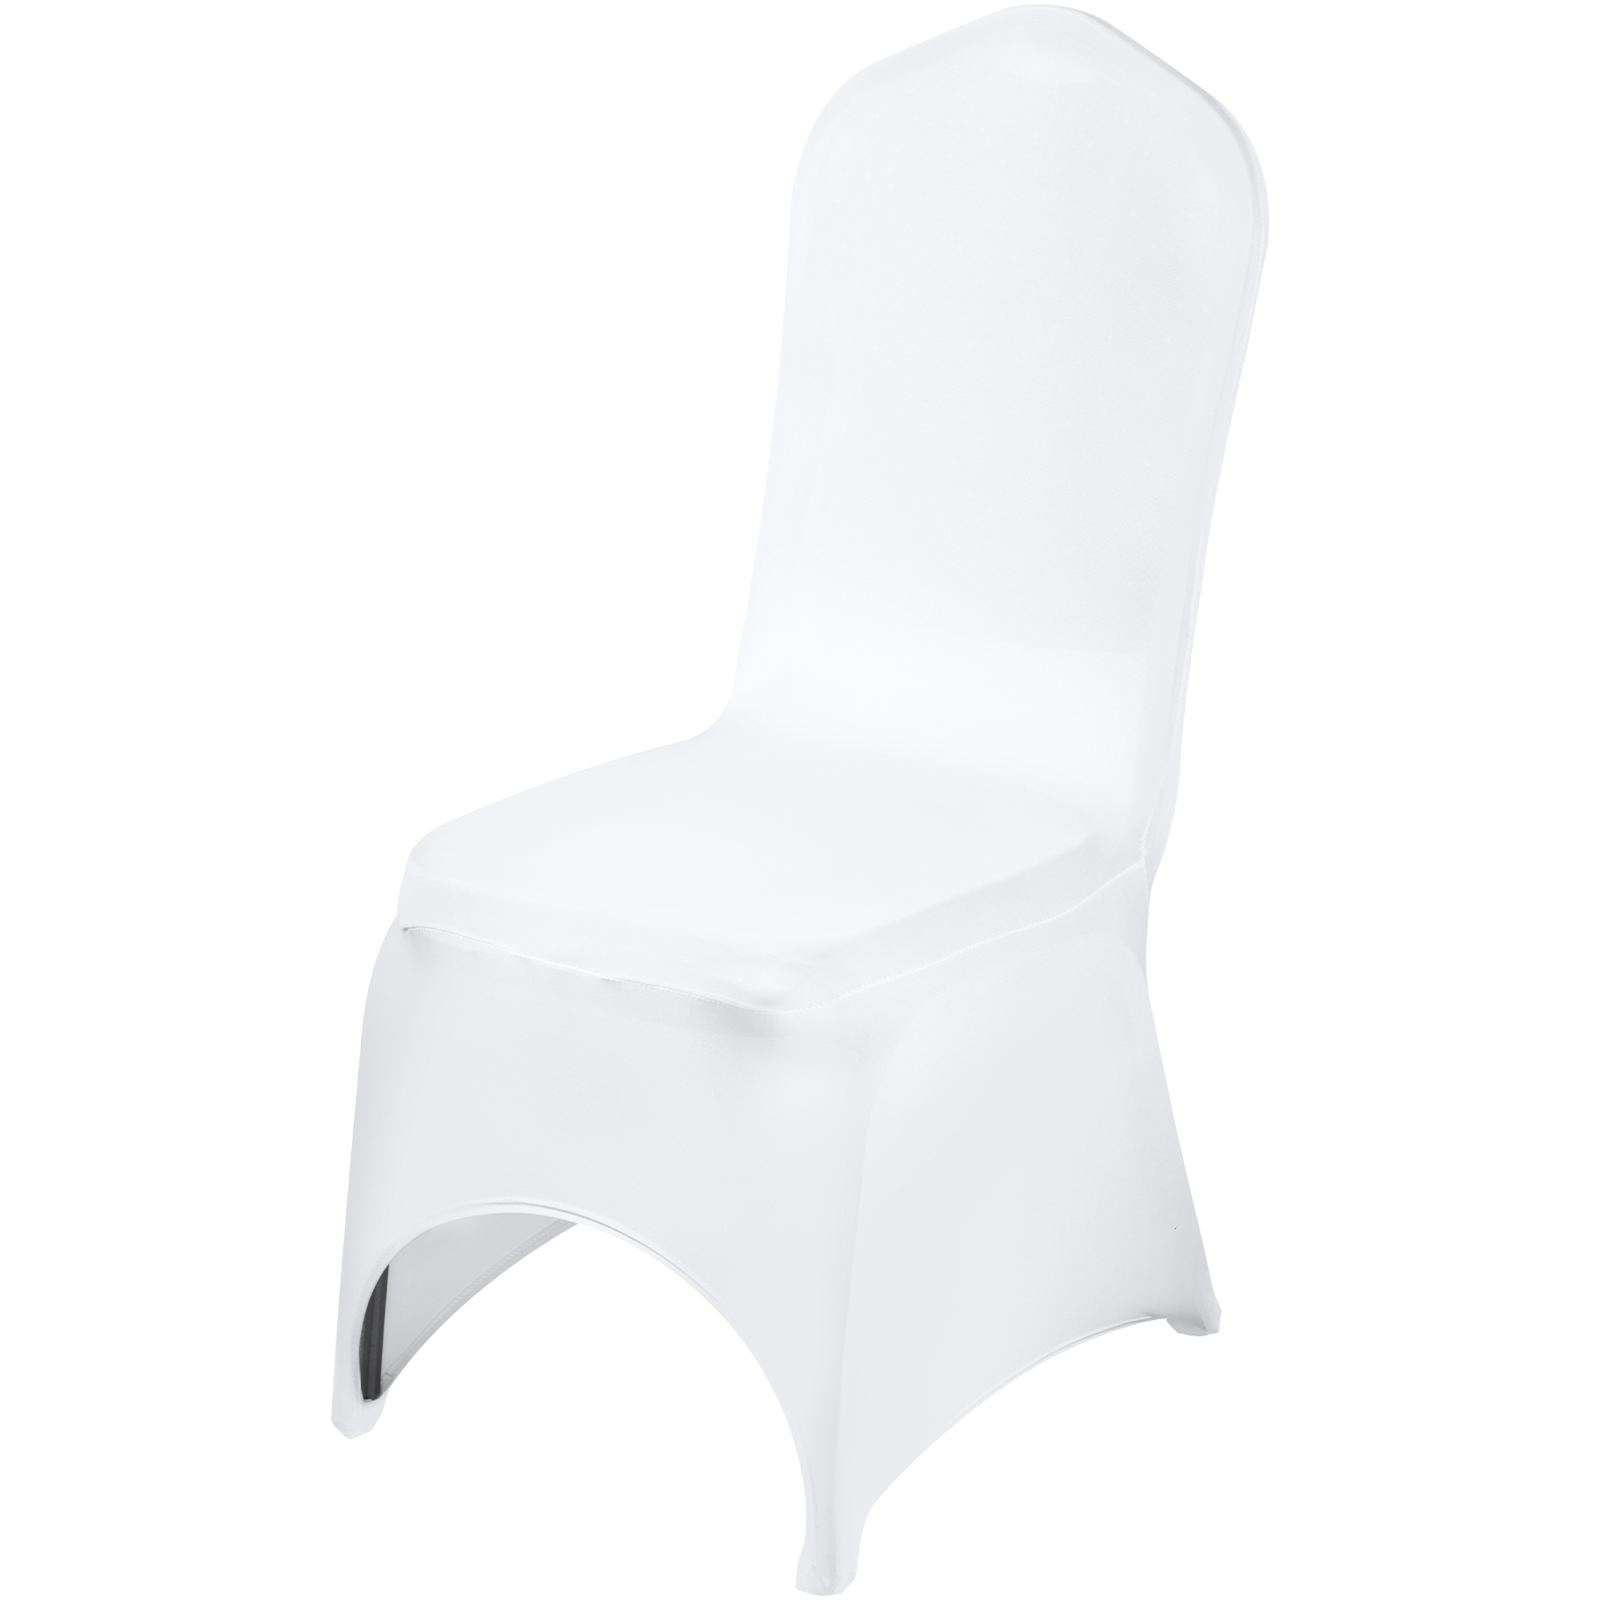 Universal 100 Pcs Polyester Spandex Wedding Chair Covers Arched Front White от Vevor Many GEOs